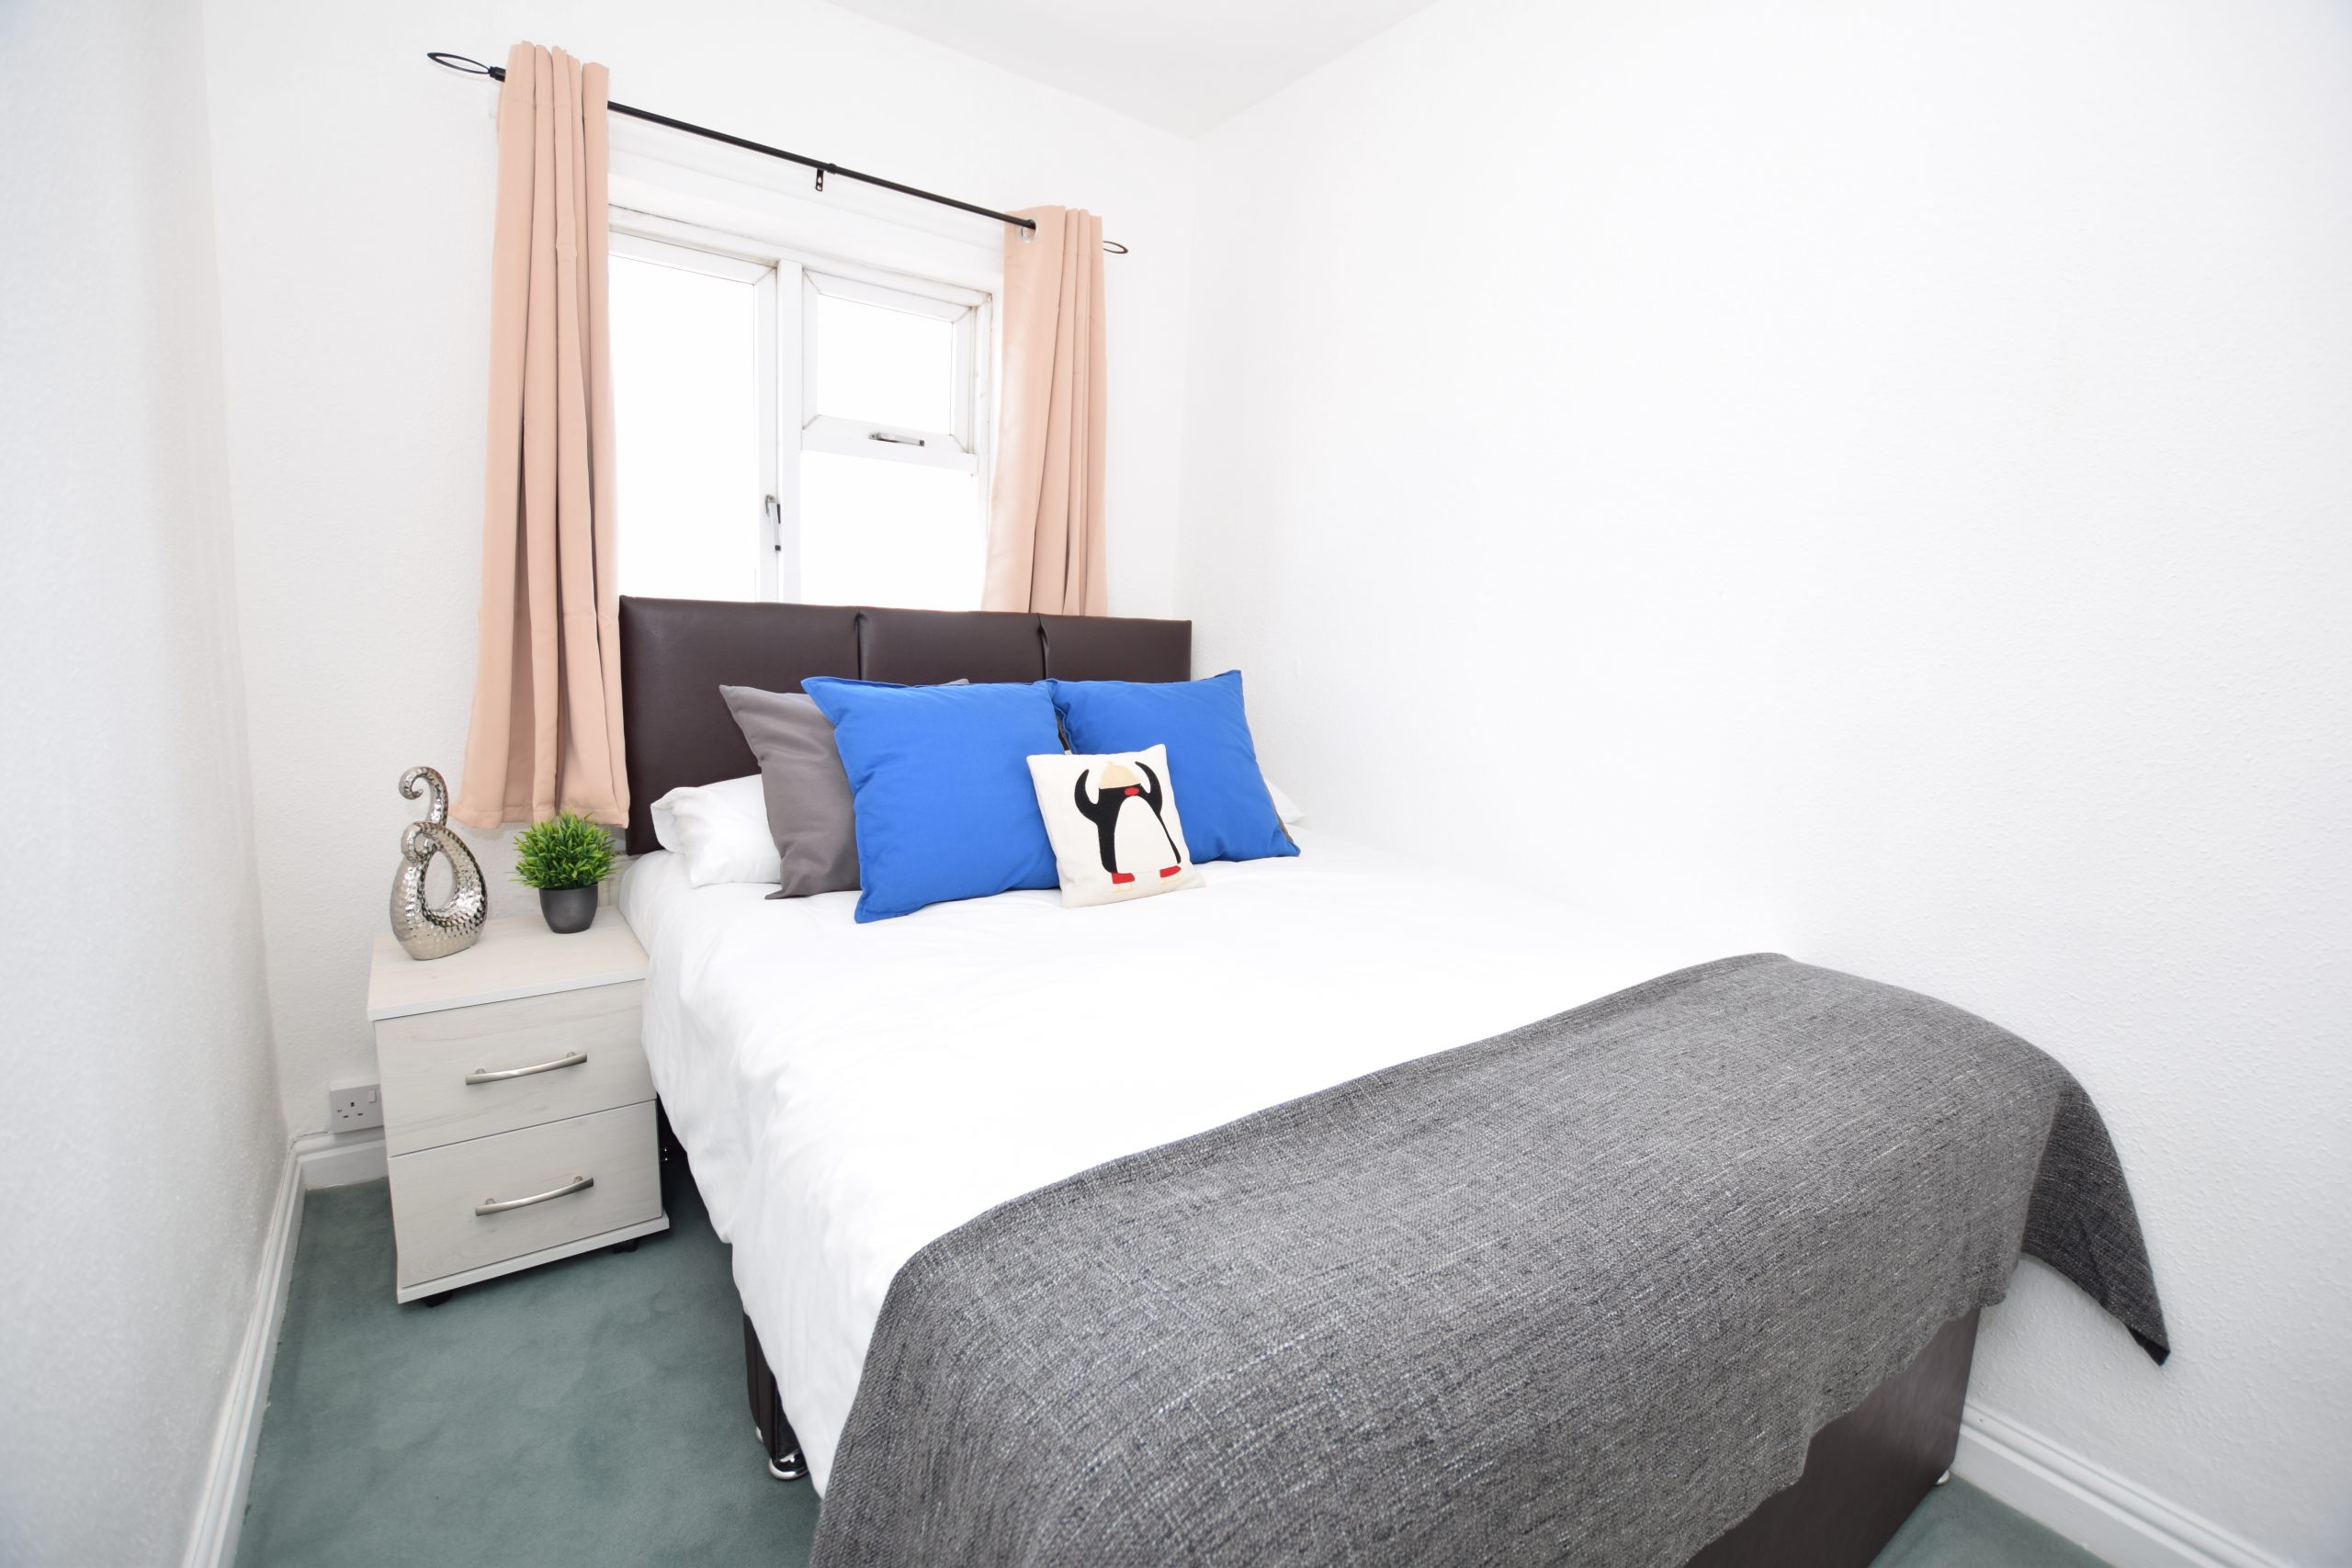 Double Room – Dudley, DY1